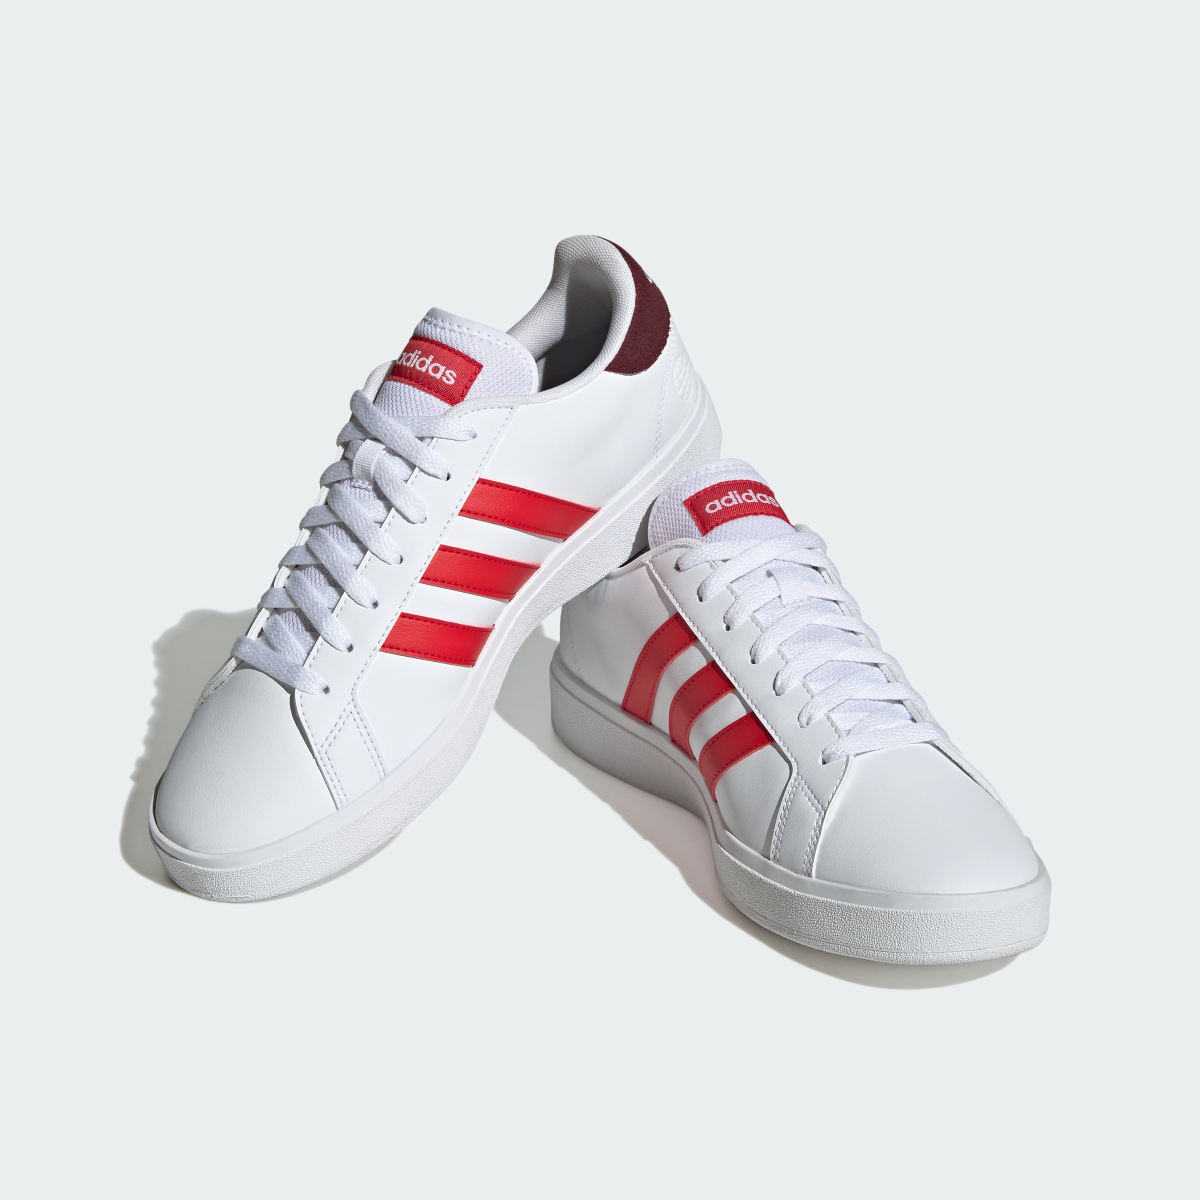 Adidas Chaussure Grand Court TD Lifestyle Court Casual. 5